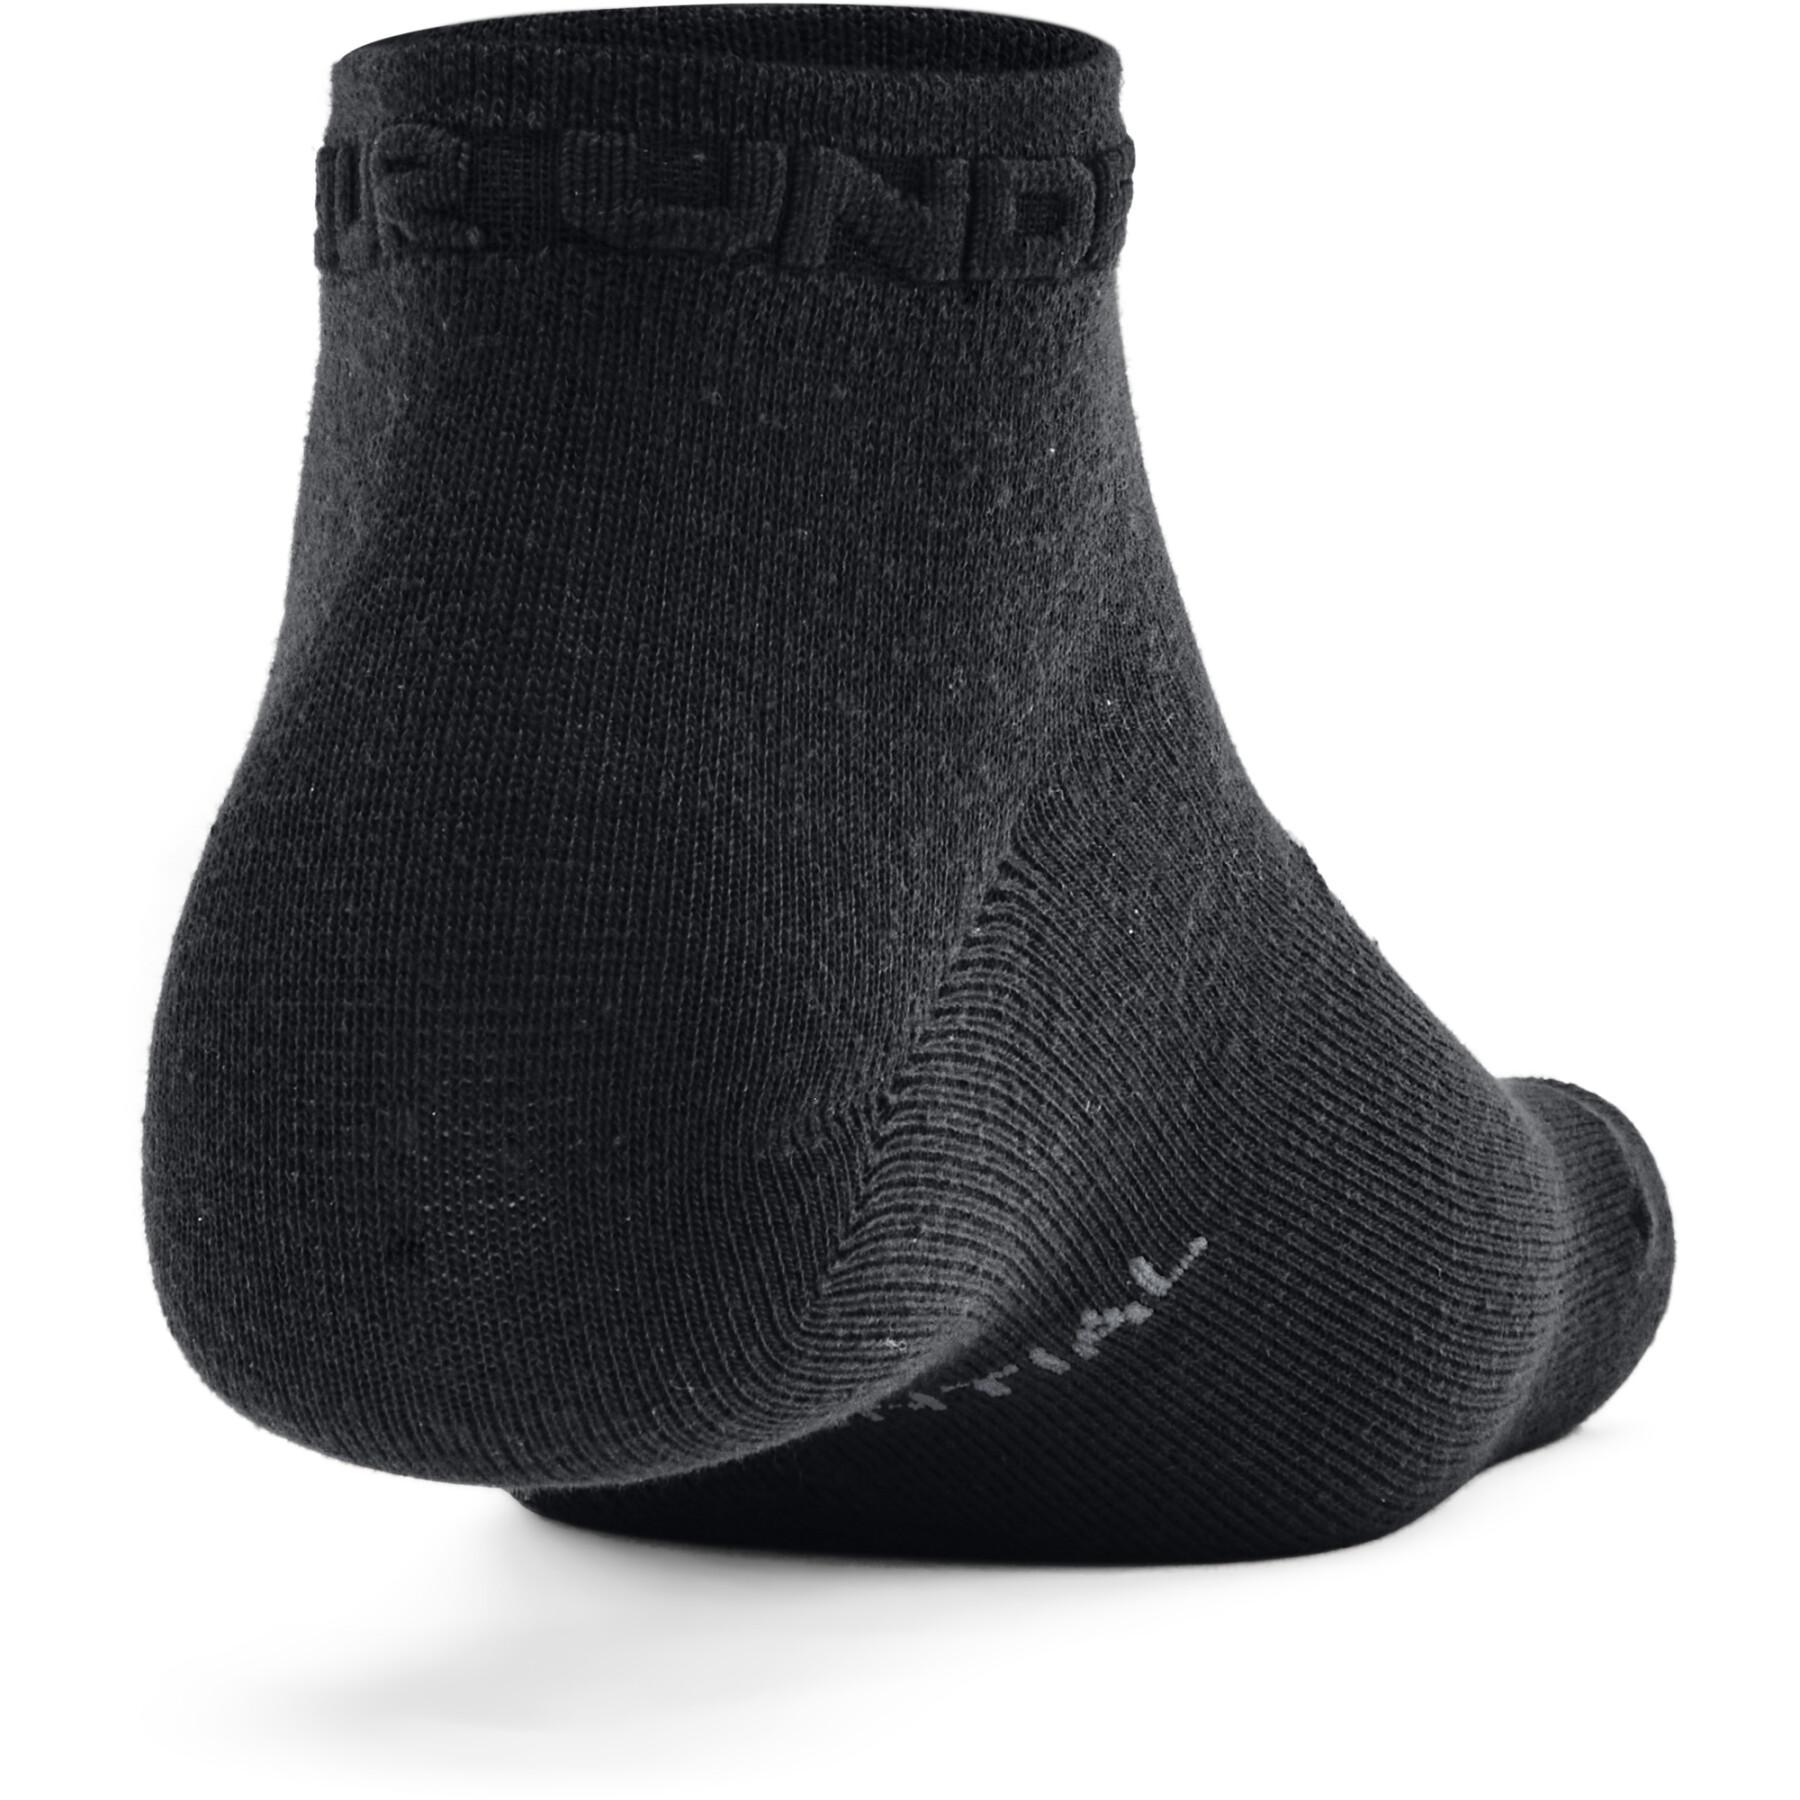 Chaussettes basses Under Armour Essential unisexes (pack of 3)